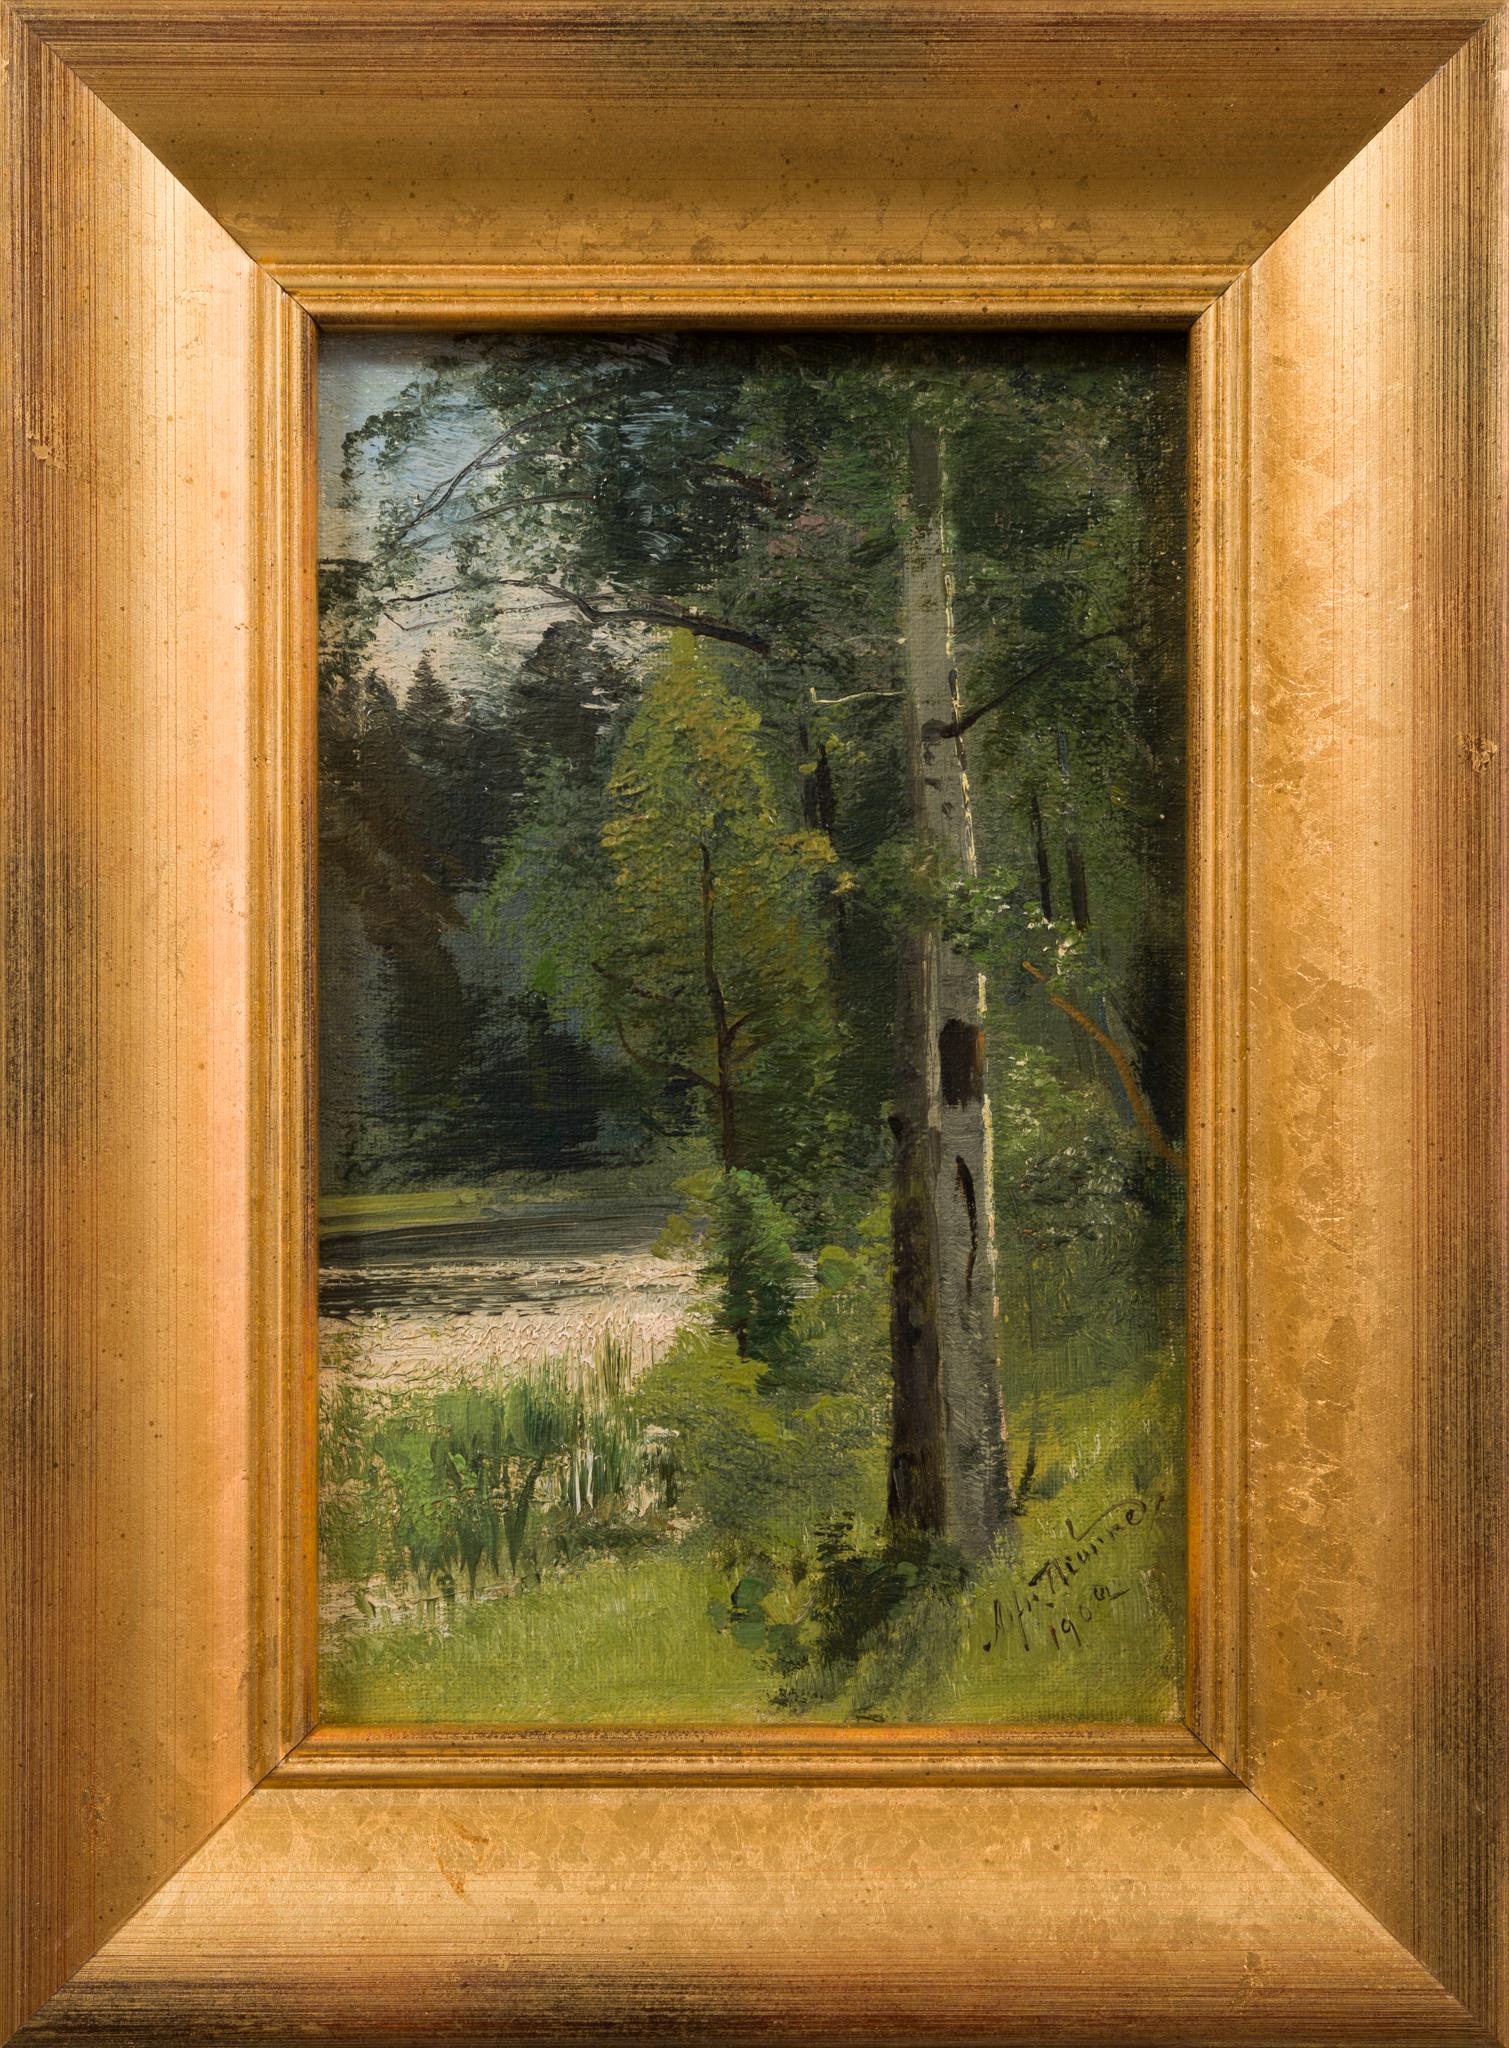 This enchanting painting called Birch Trees by the Stream by Alfred Thörne captures the serene beauty of a small forest scene, measuring just 27 x 17 cm. The artwork is a testament to Thörne's fascination with nature, particularly his recurring